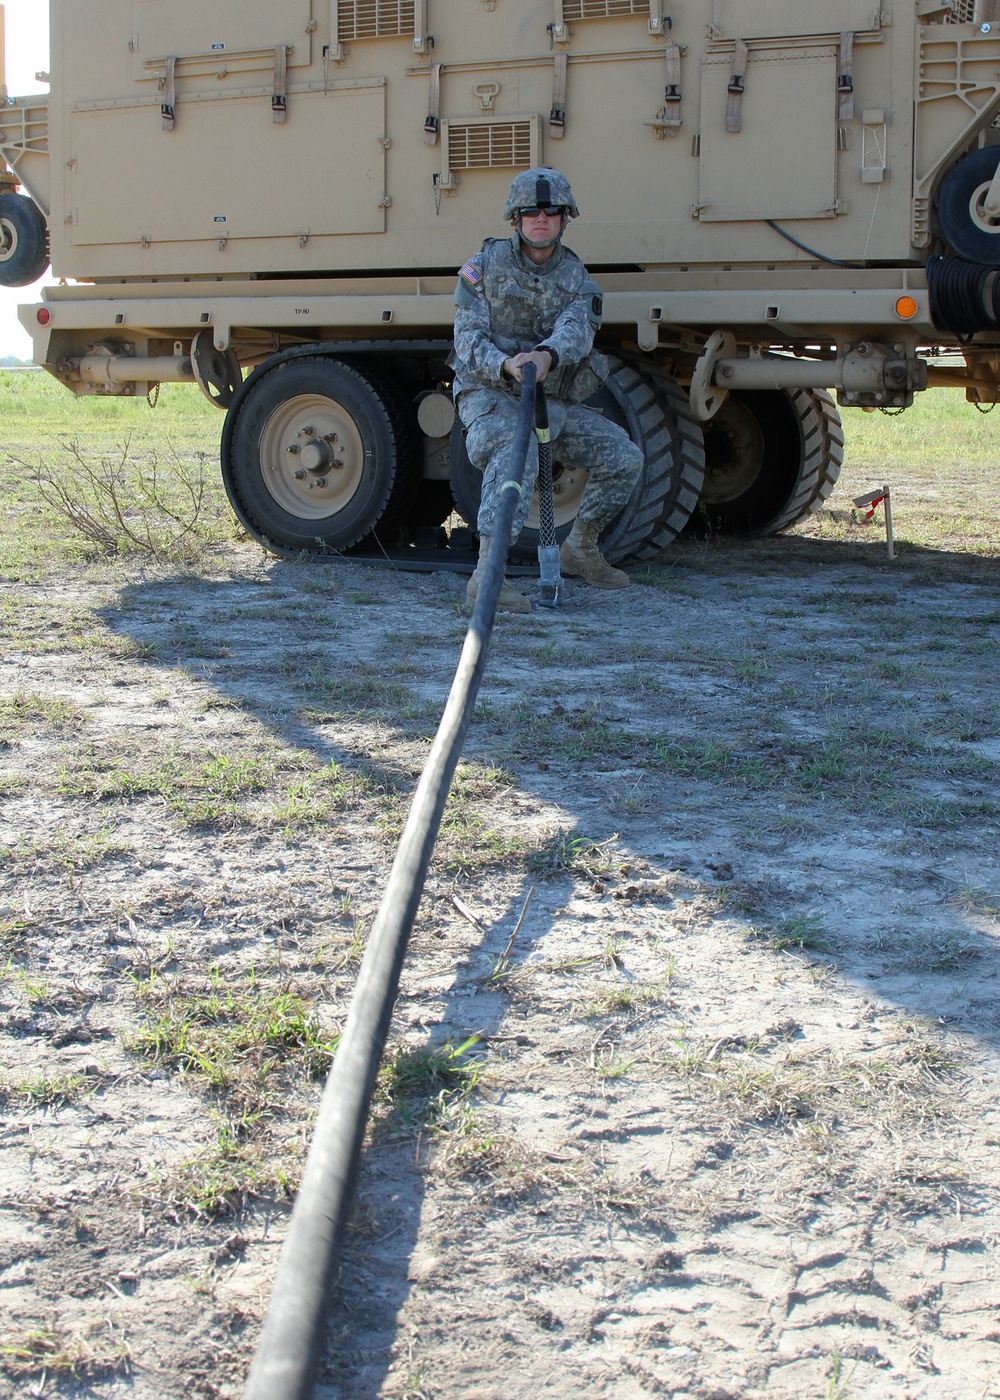 41st Fires Brigade soldiers compete for top radar team